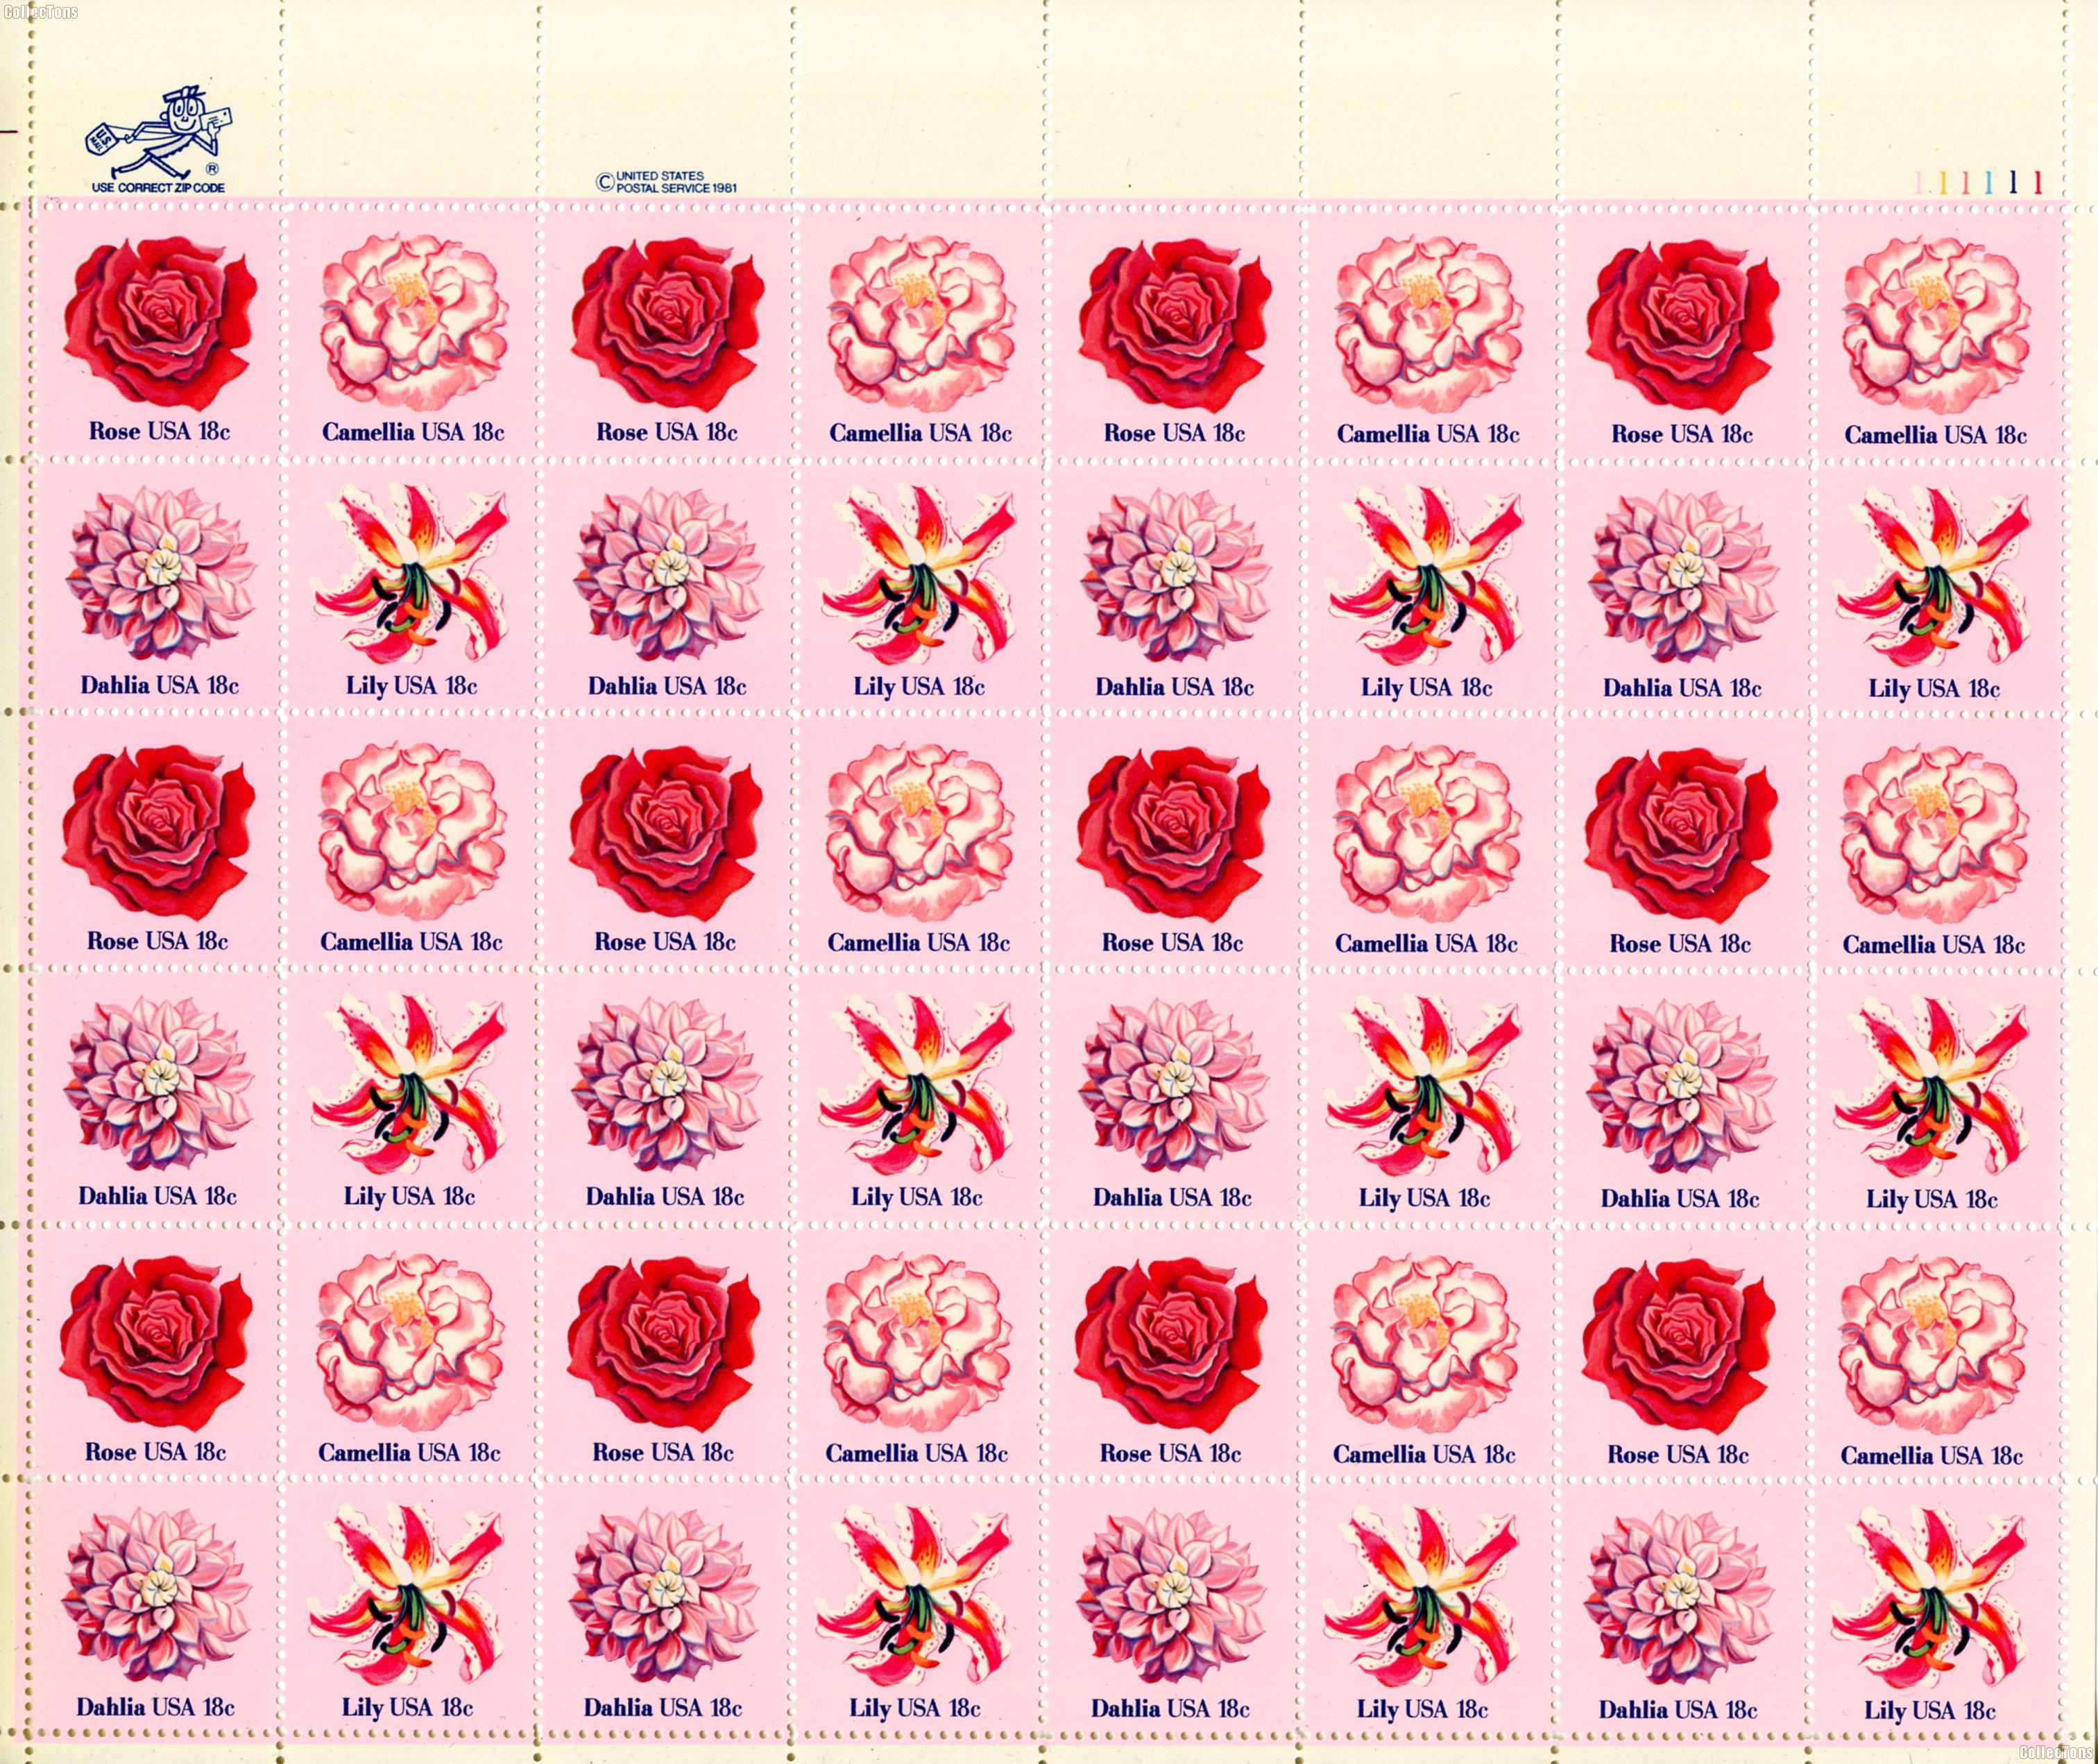 1981 Flowers 18 Cent US Postage Stamp MNH Sheet of 48 Scott #1876-1879